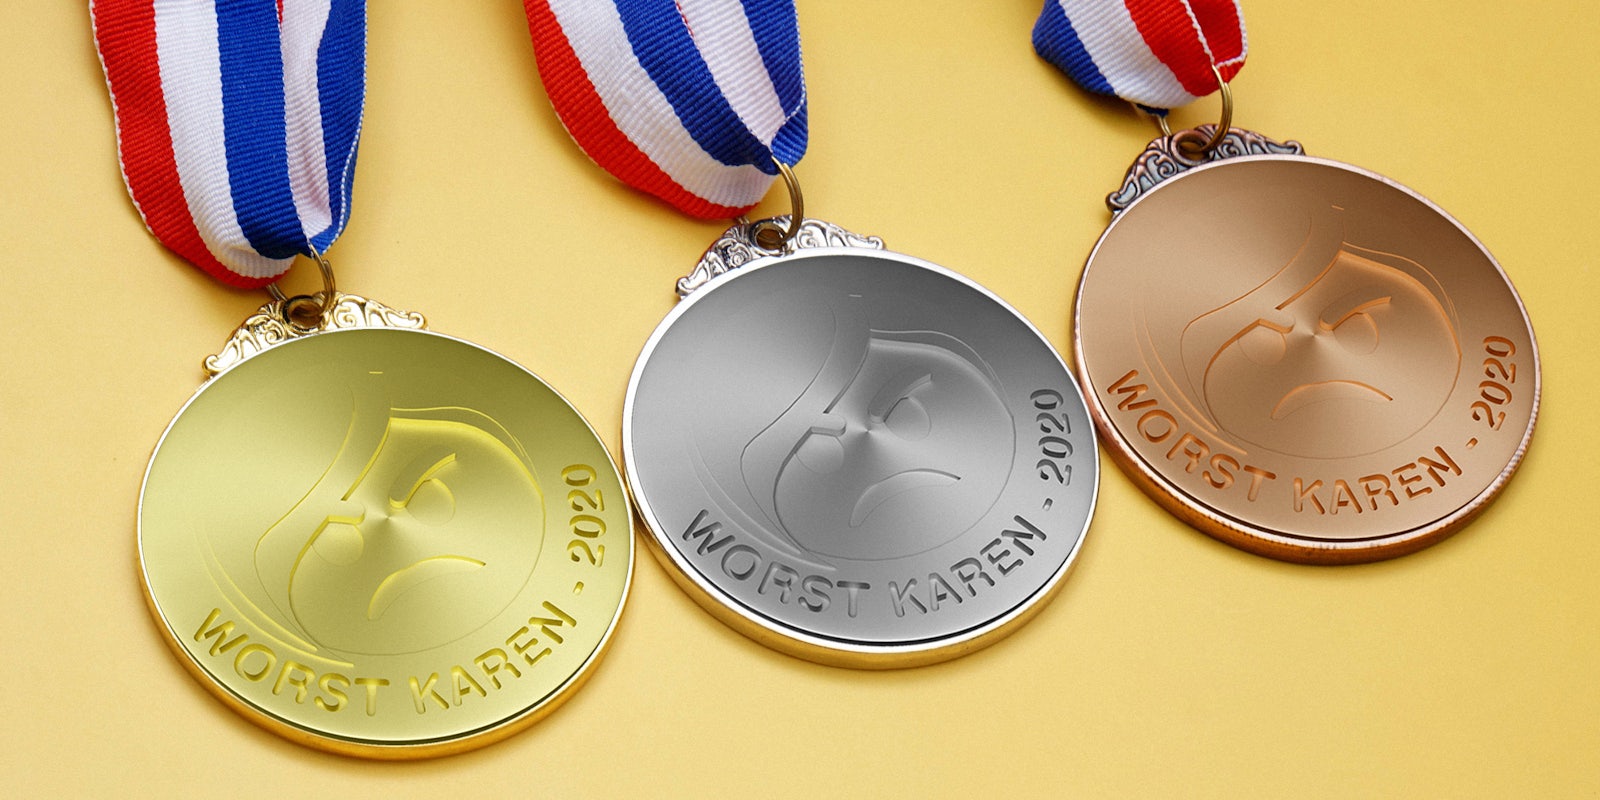 worst karen of 2020 awards in gold, silver, and bronze